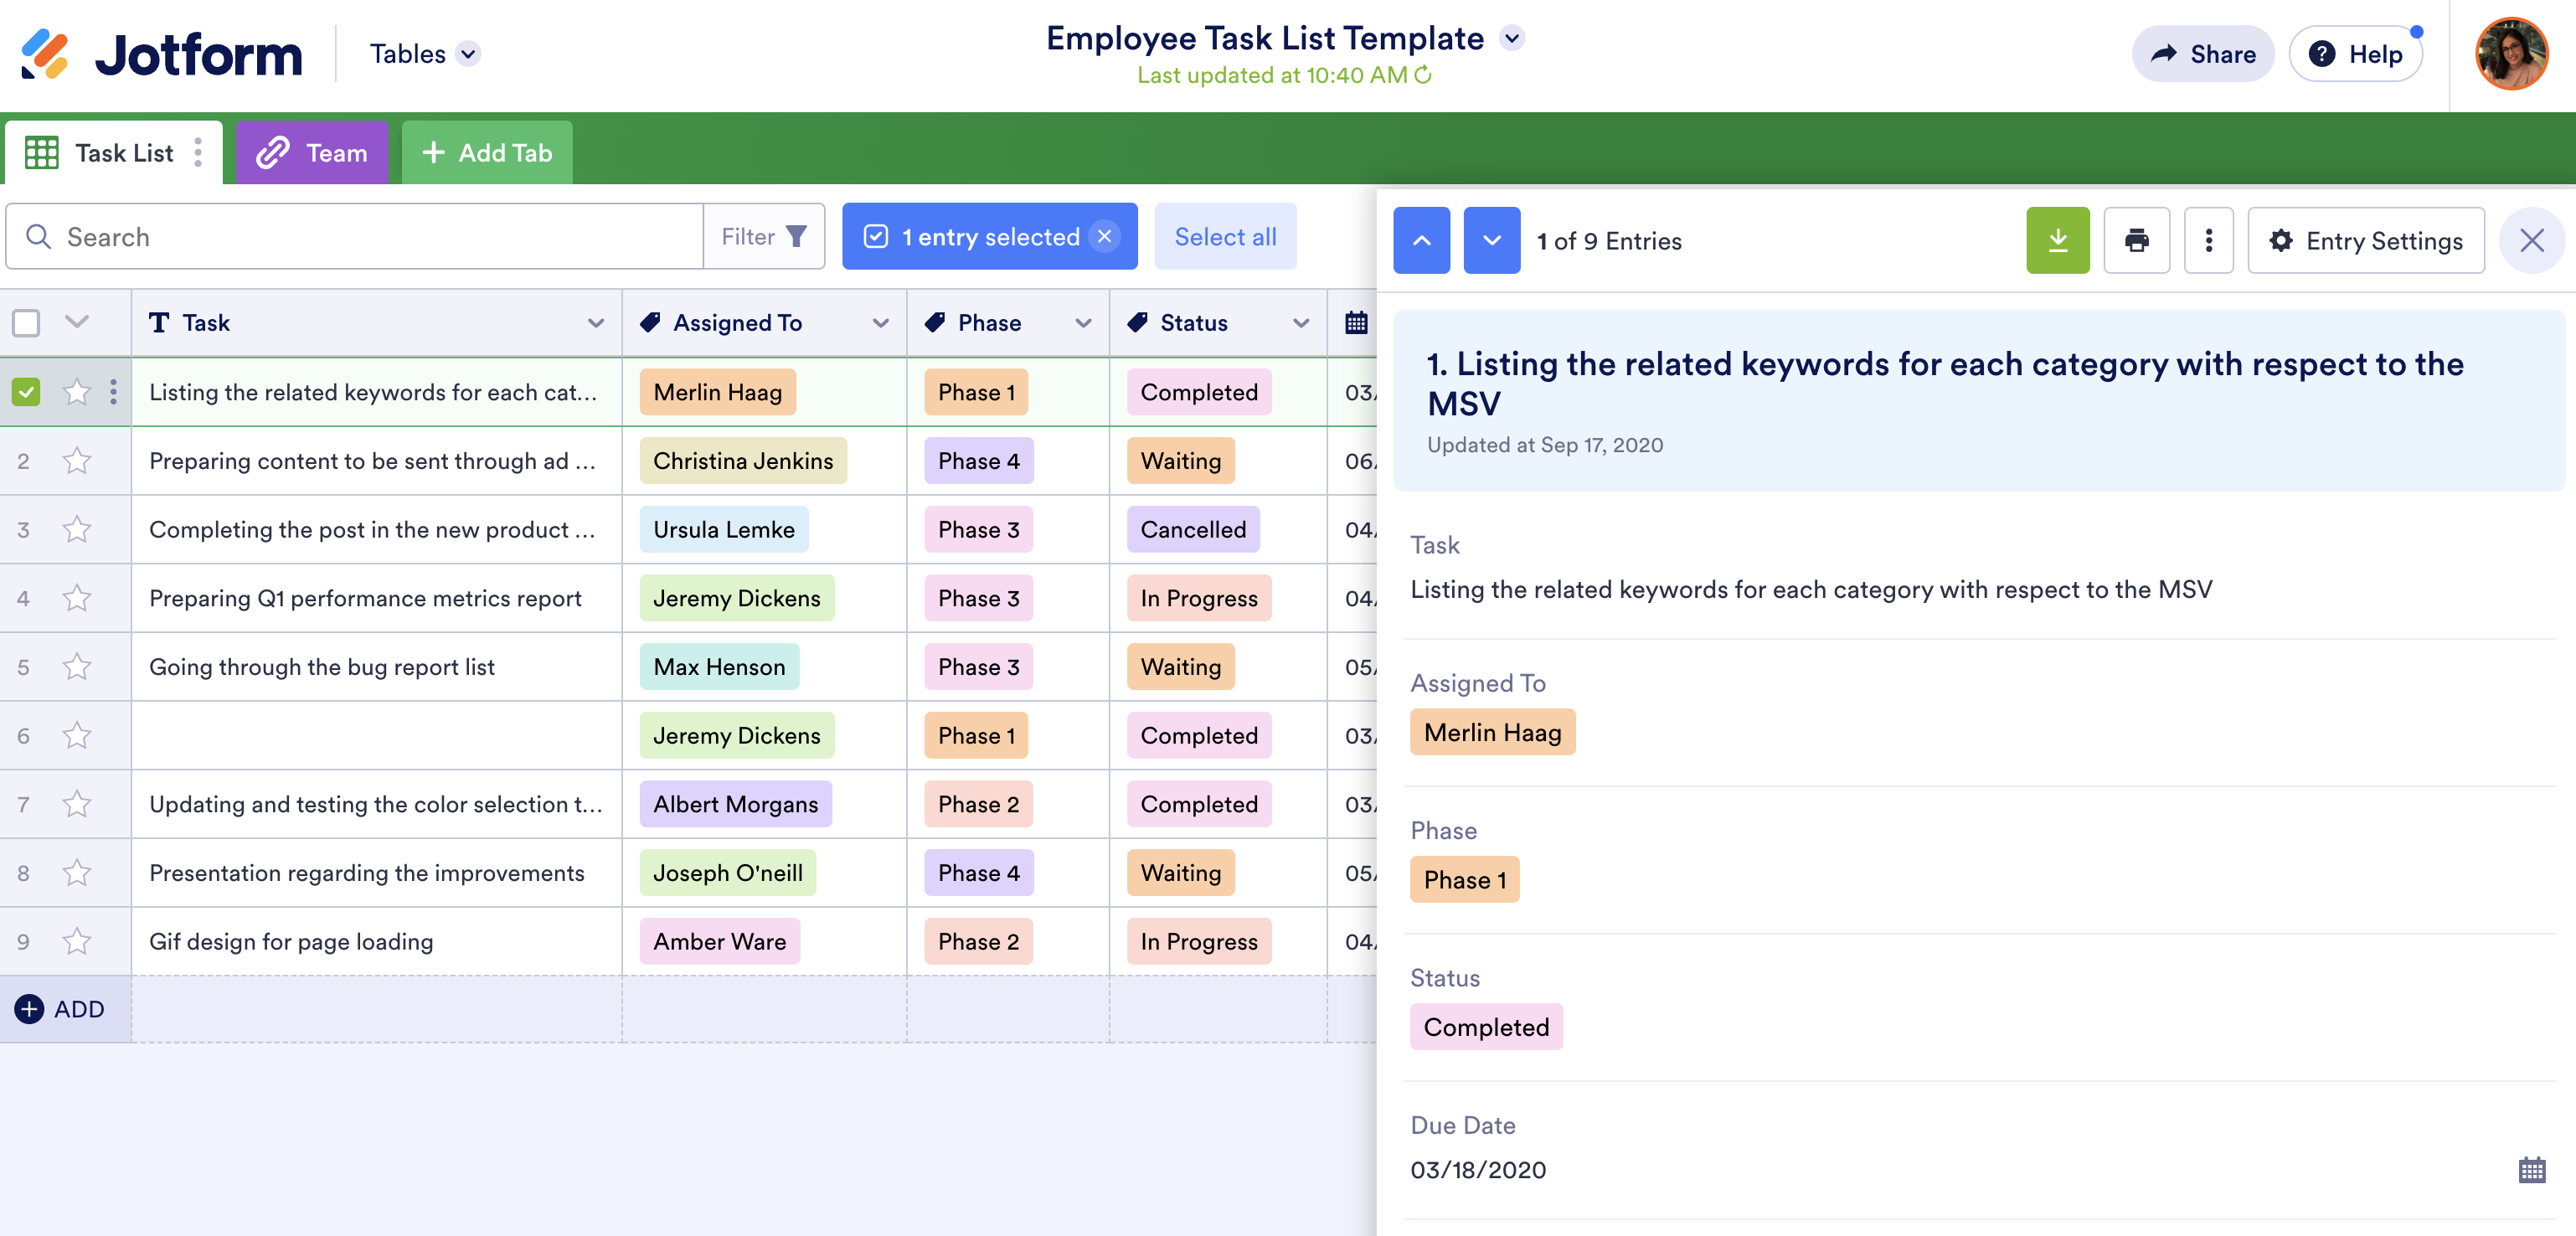 Screenshot of Employee Task List Template in Jotform Tables Viewing Entry 1